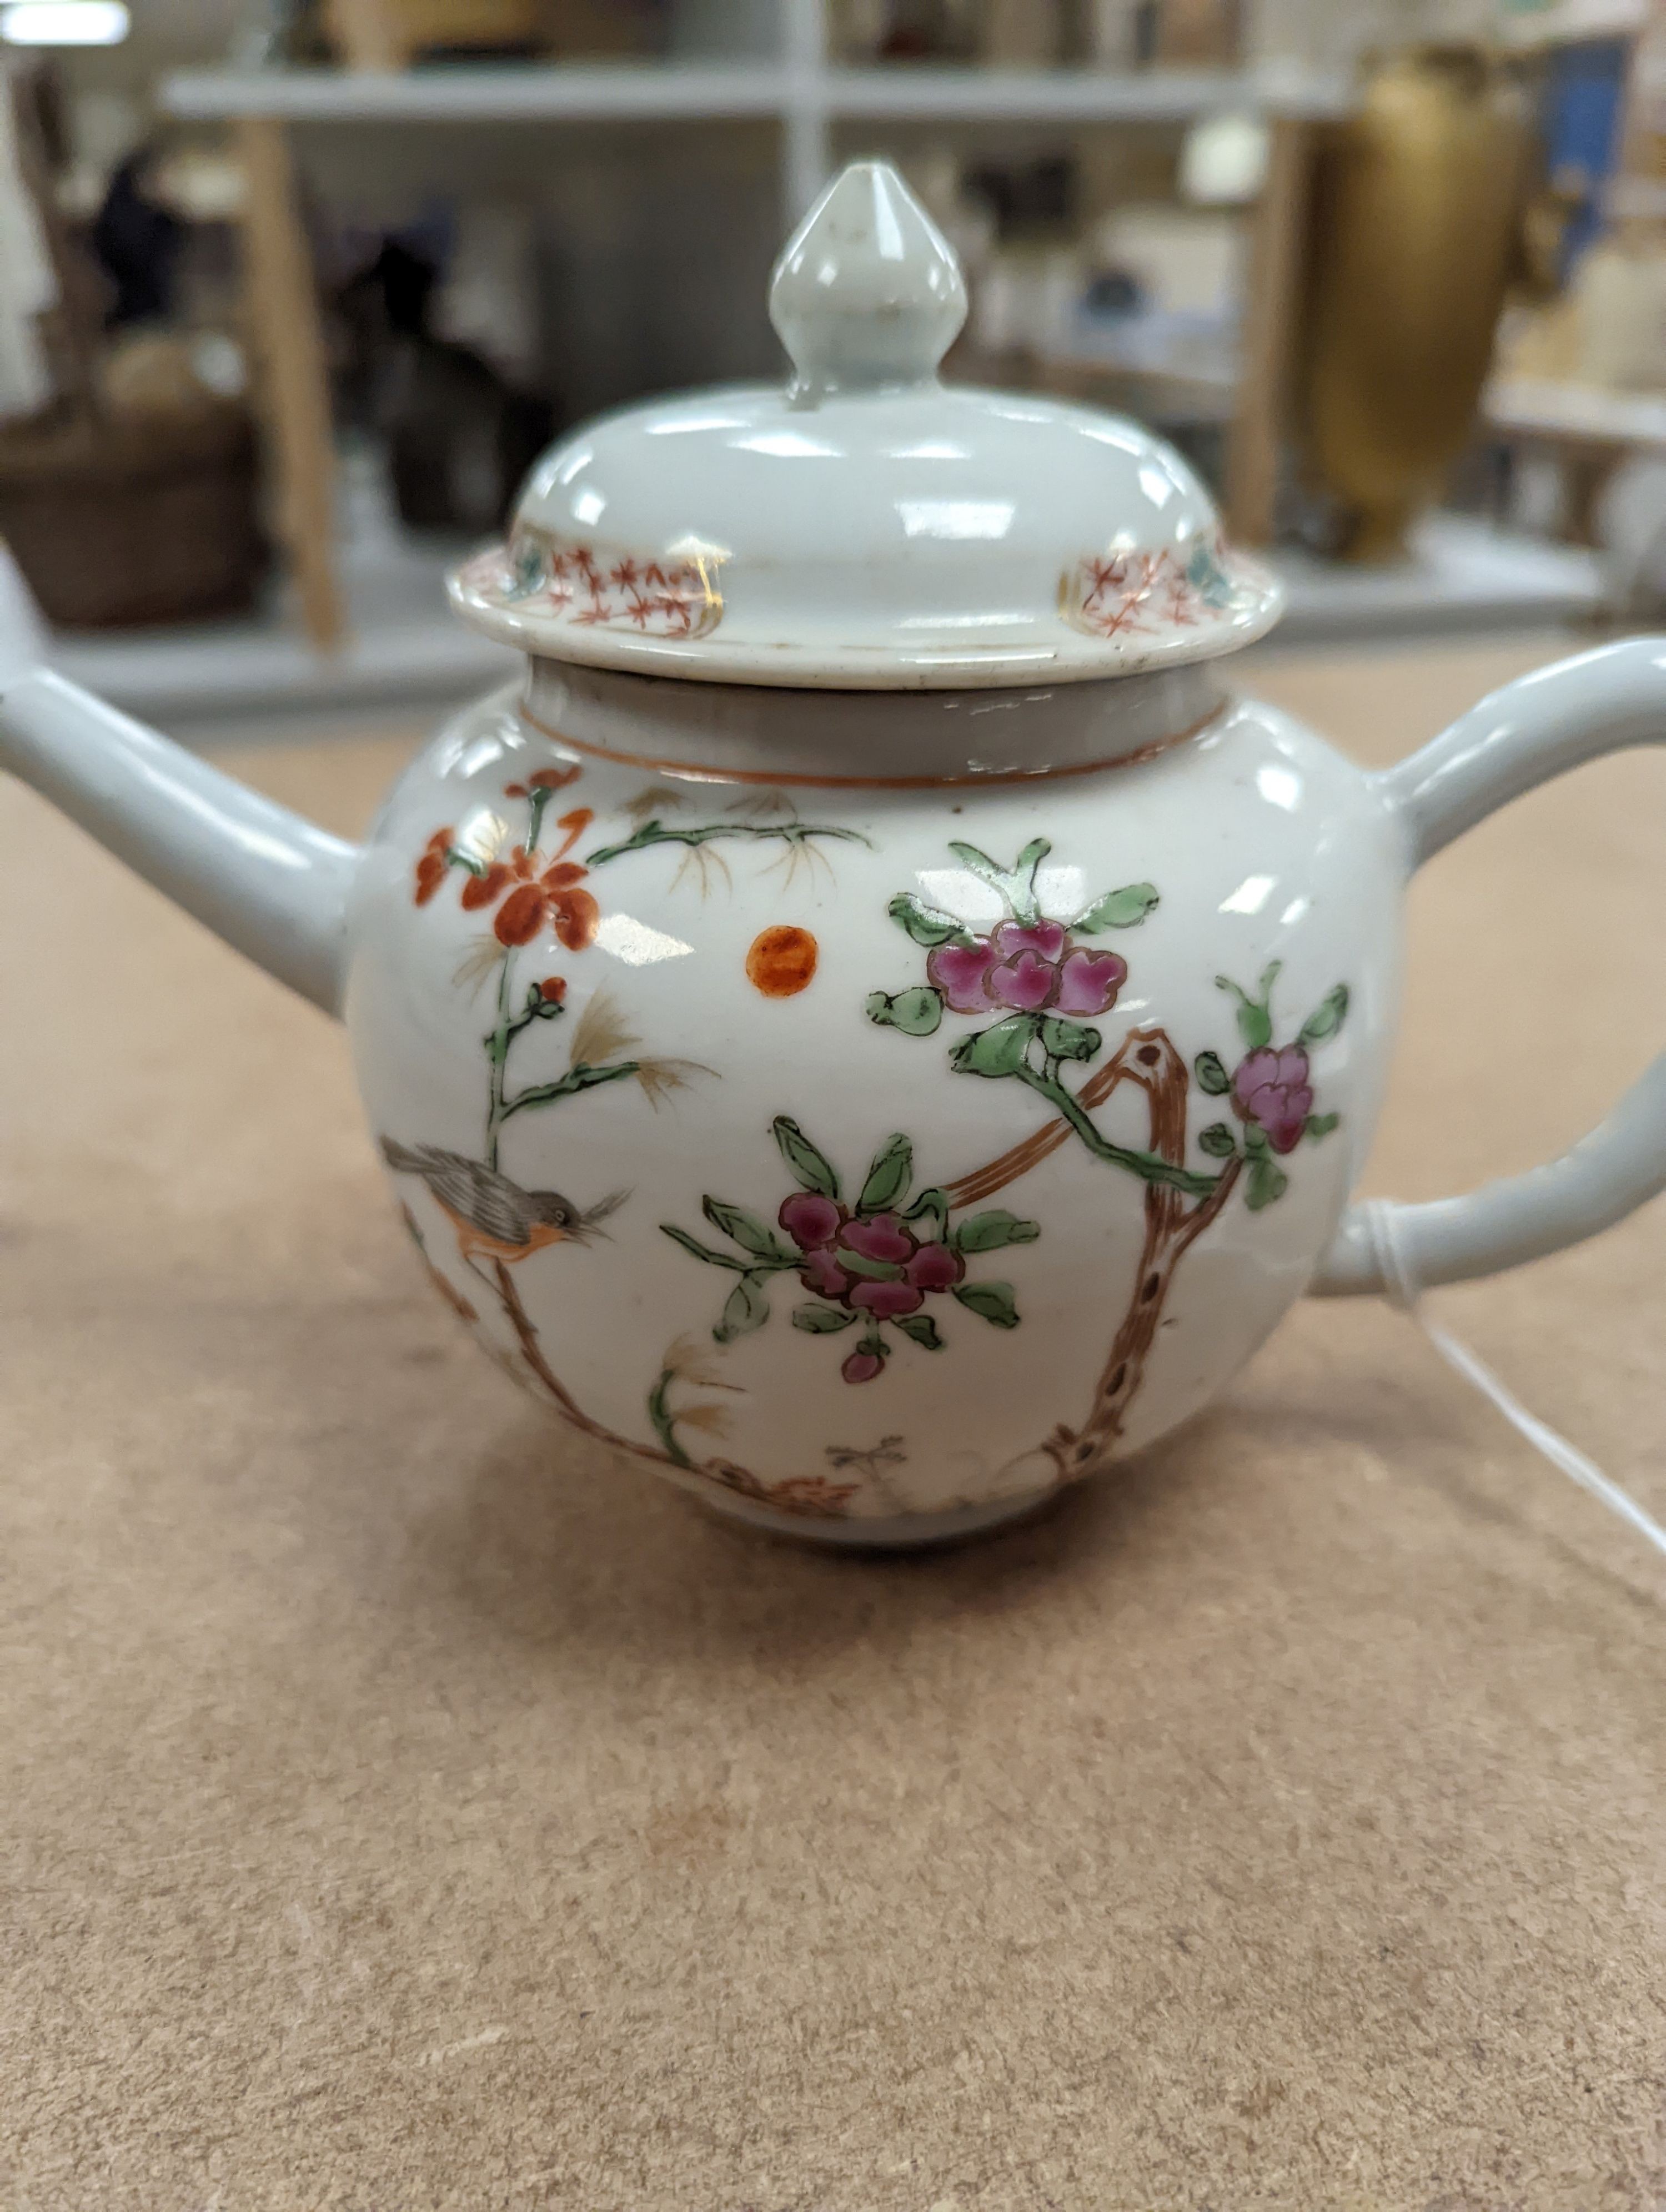 An 18th century Chinese famille rose teapot and associated cover 13cm